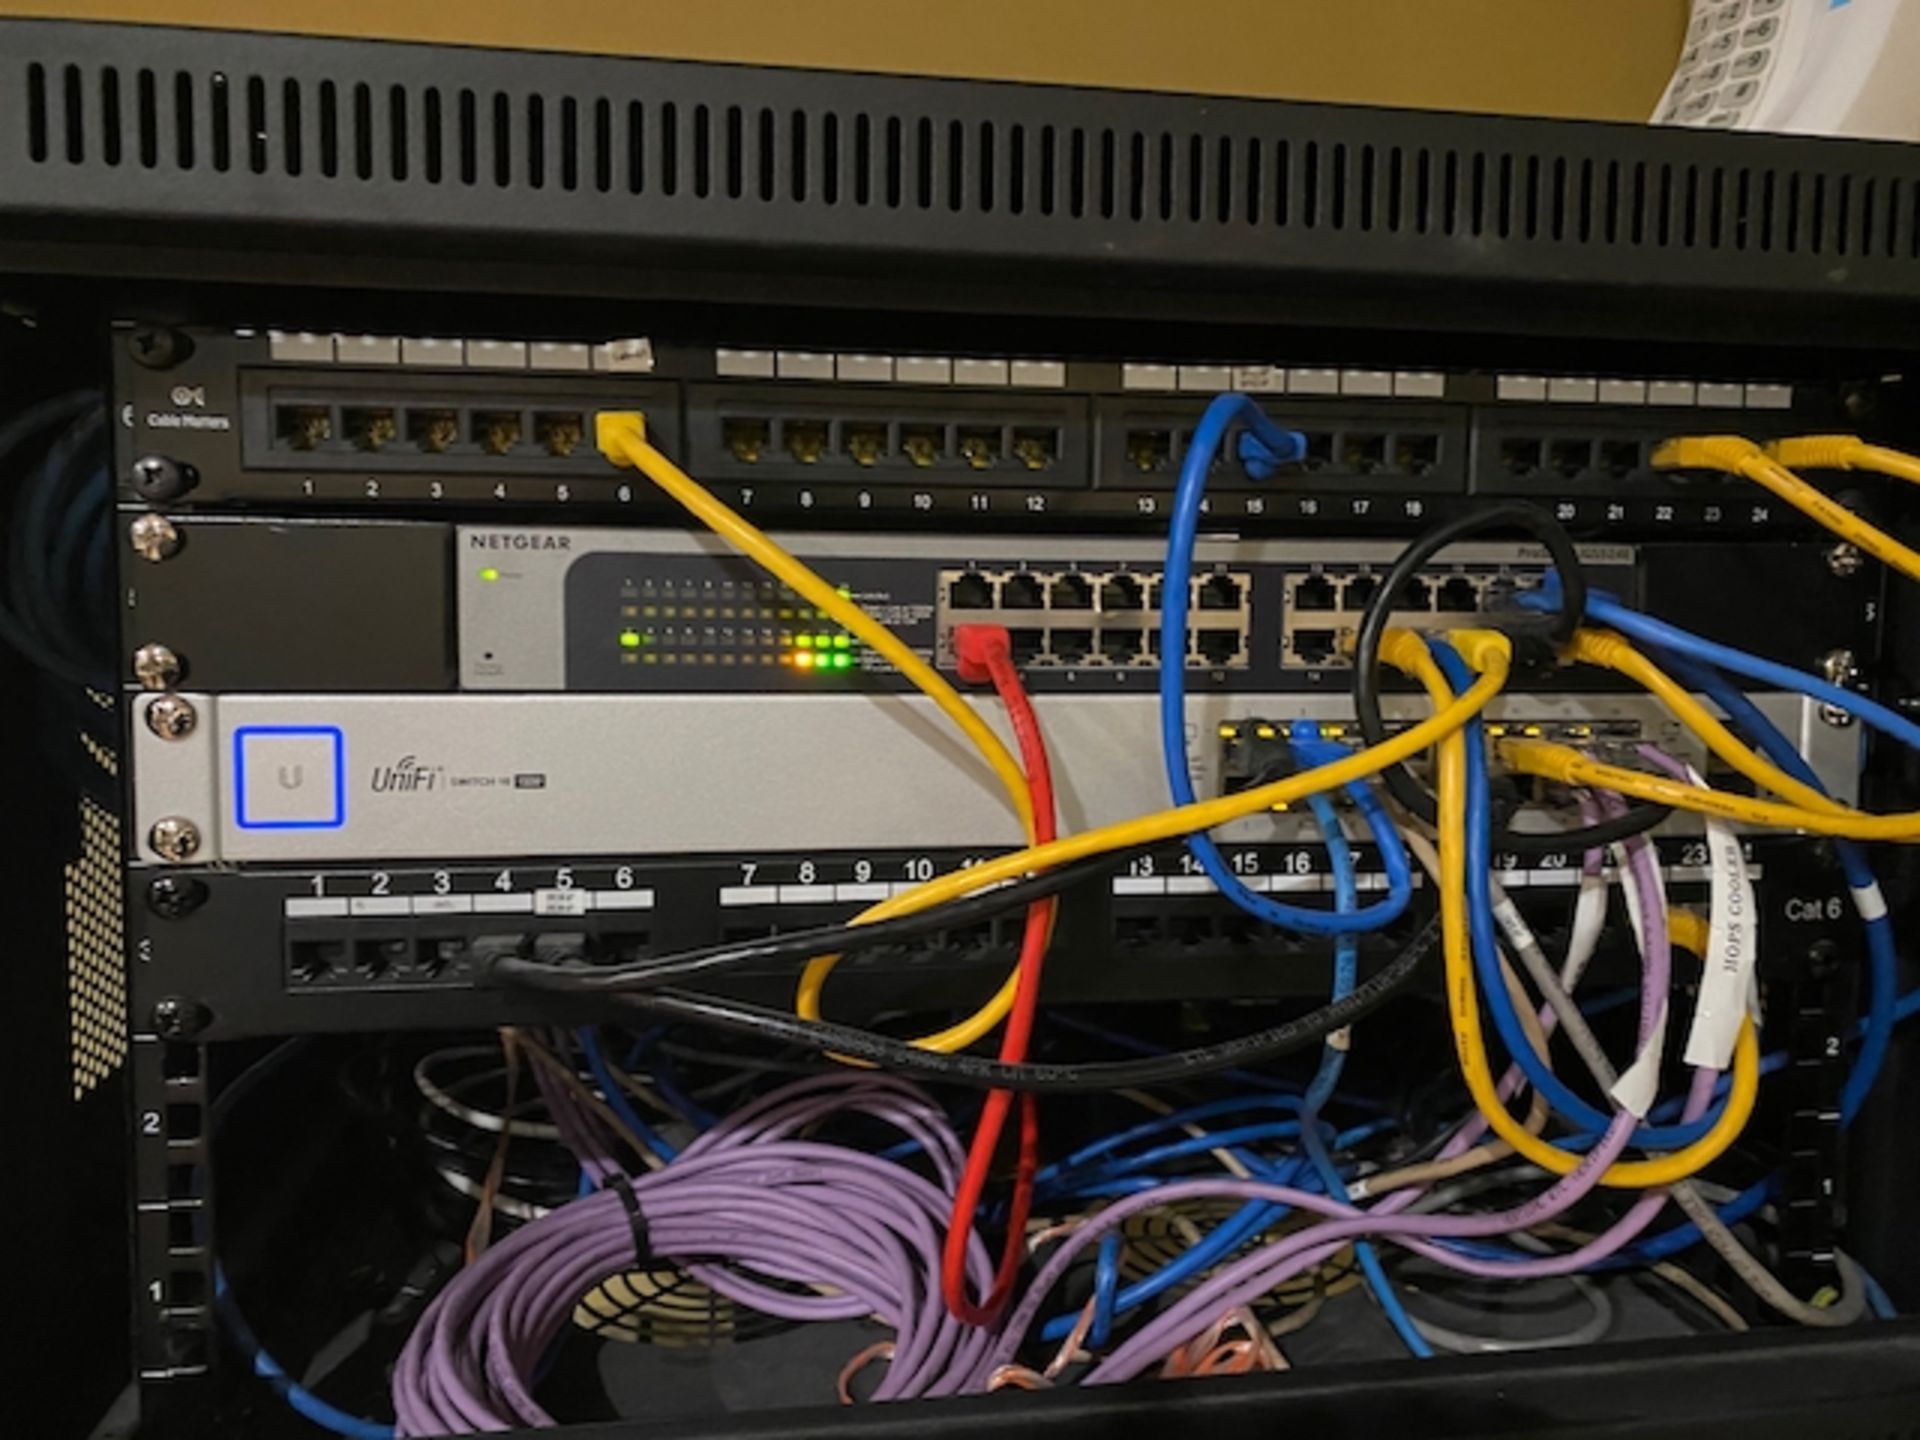 Server Rack and Network Equipment with Wireless Router, Monitor, Patch Cable | Rig Fee $75 - Image 4 of 4